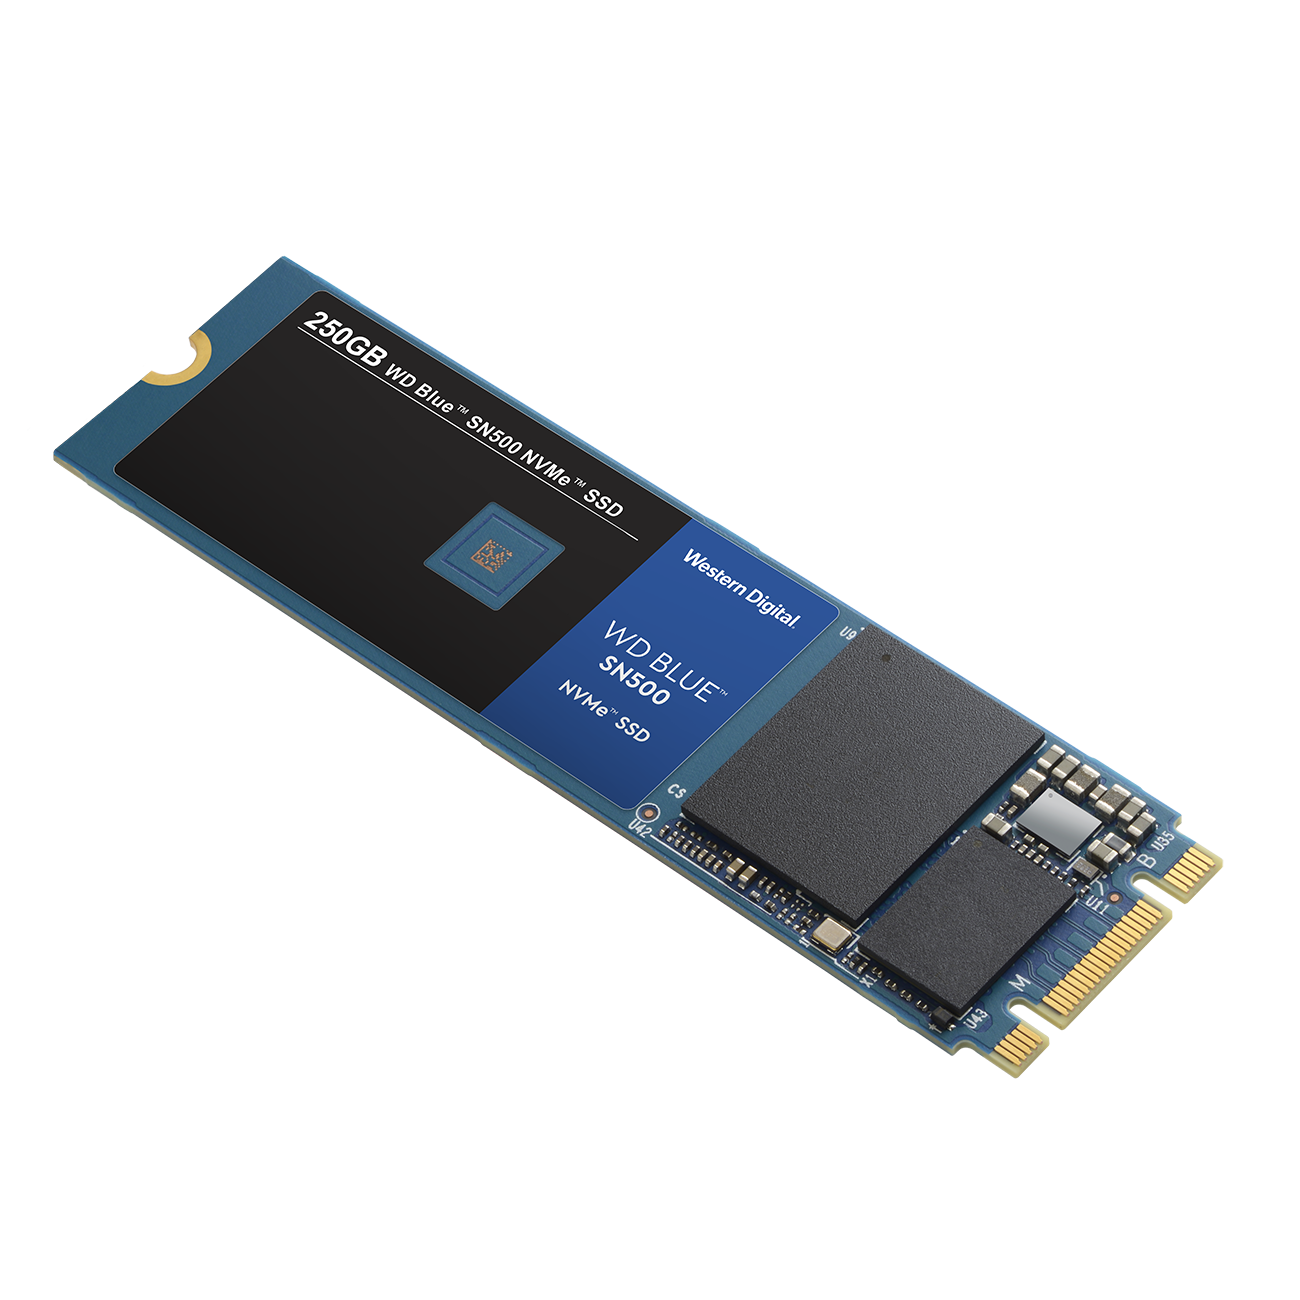 Western Digital announces WD Black SN850X NVMe SSD and more gamer-centric  storage devices